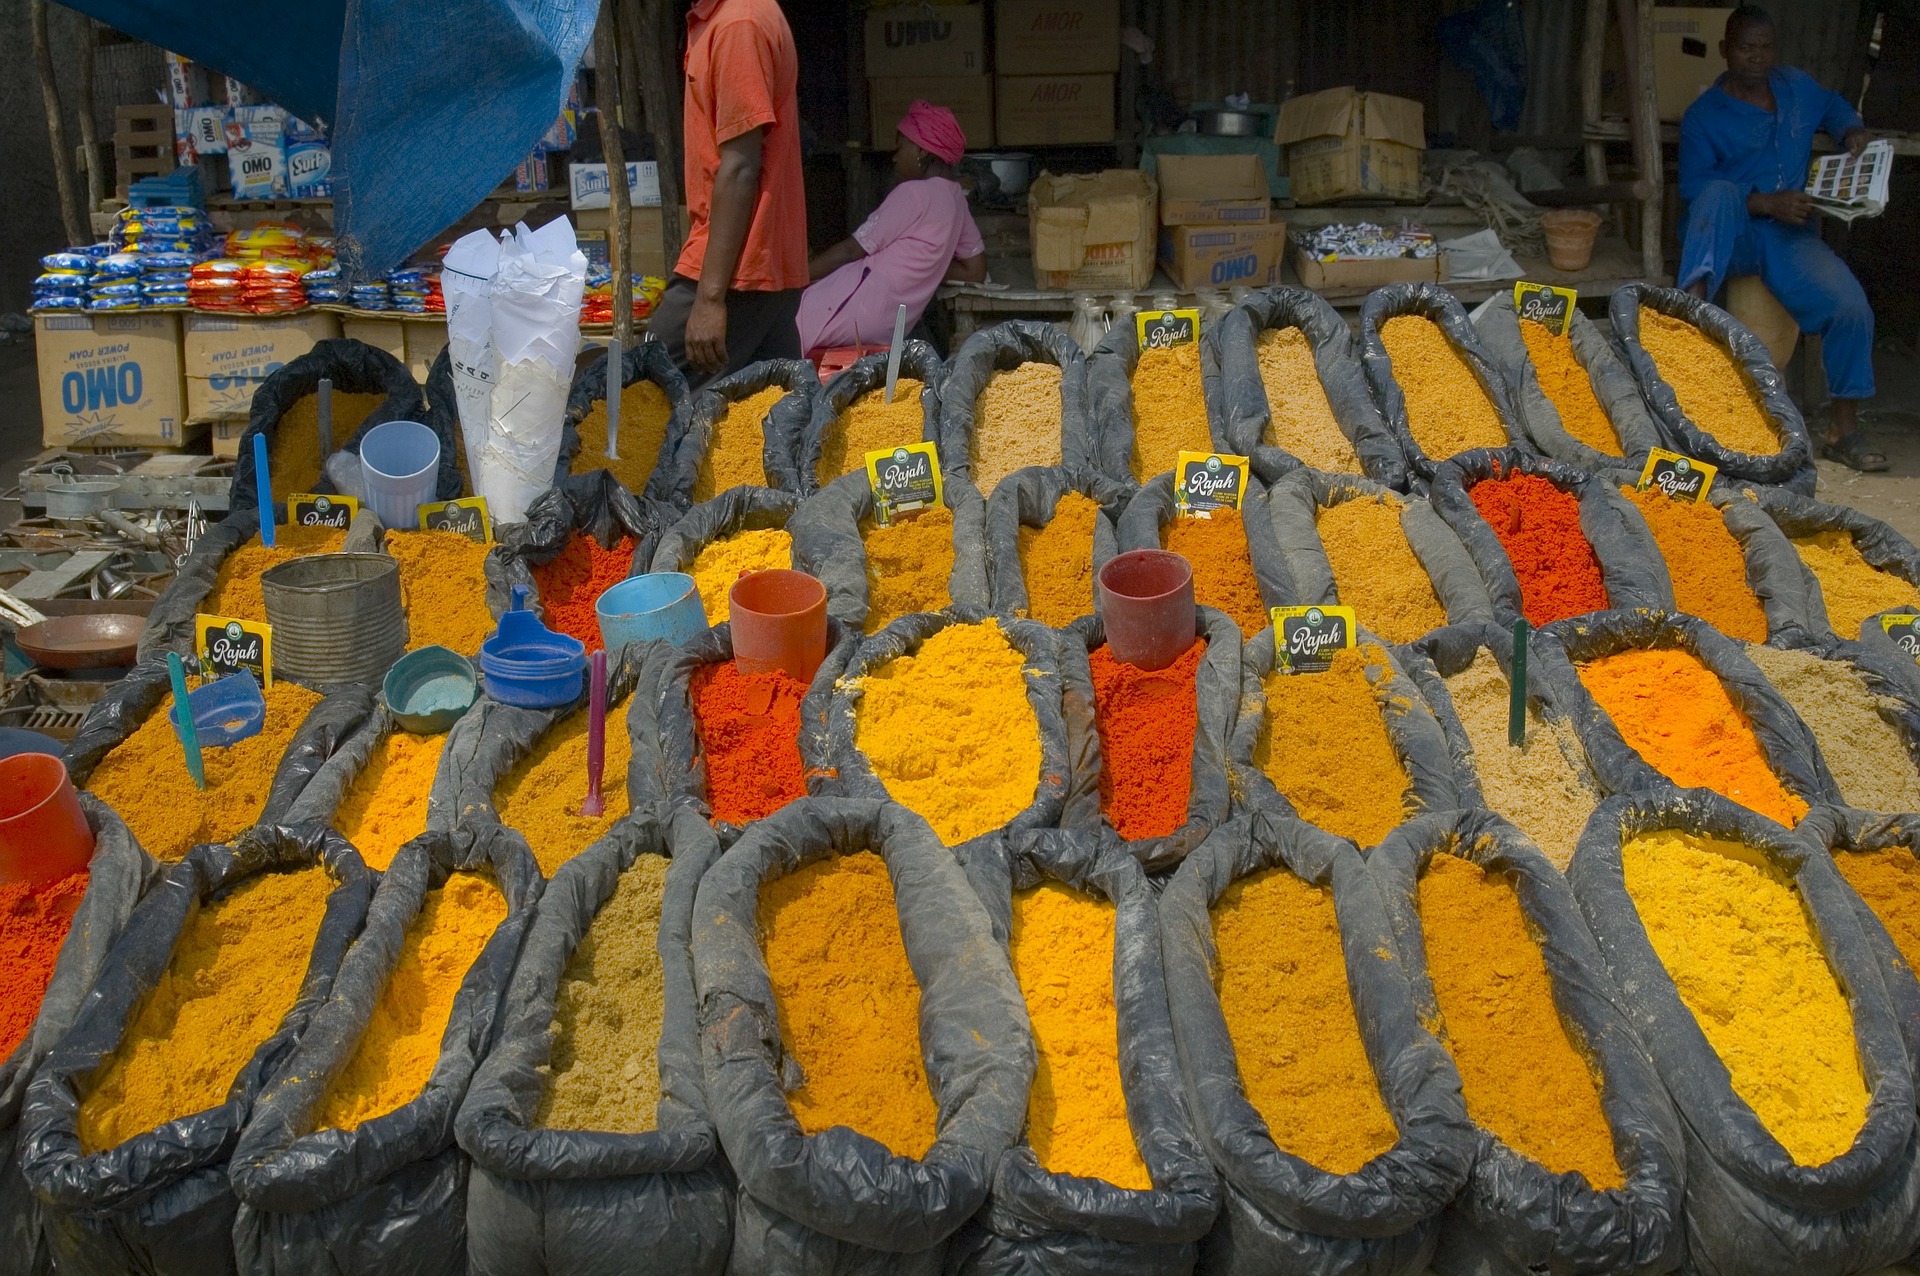 Array of colorful spices displayed in burlap bags at market in Mozambique